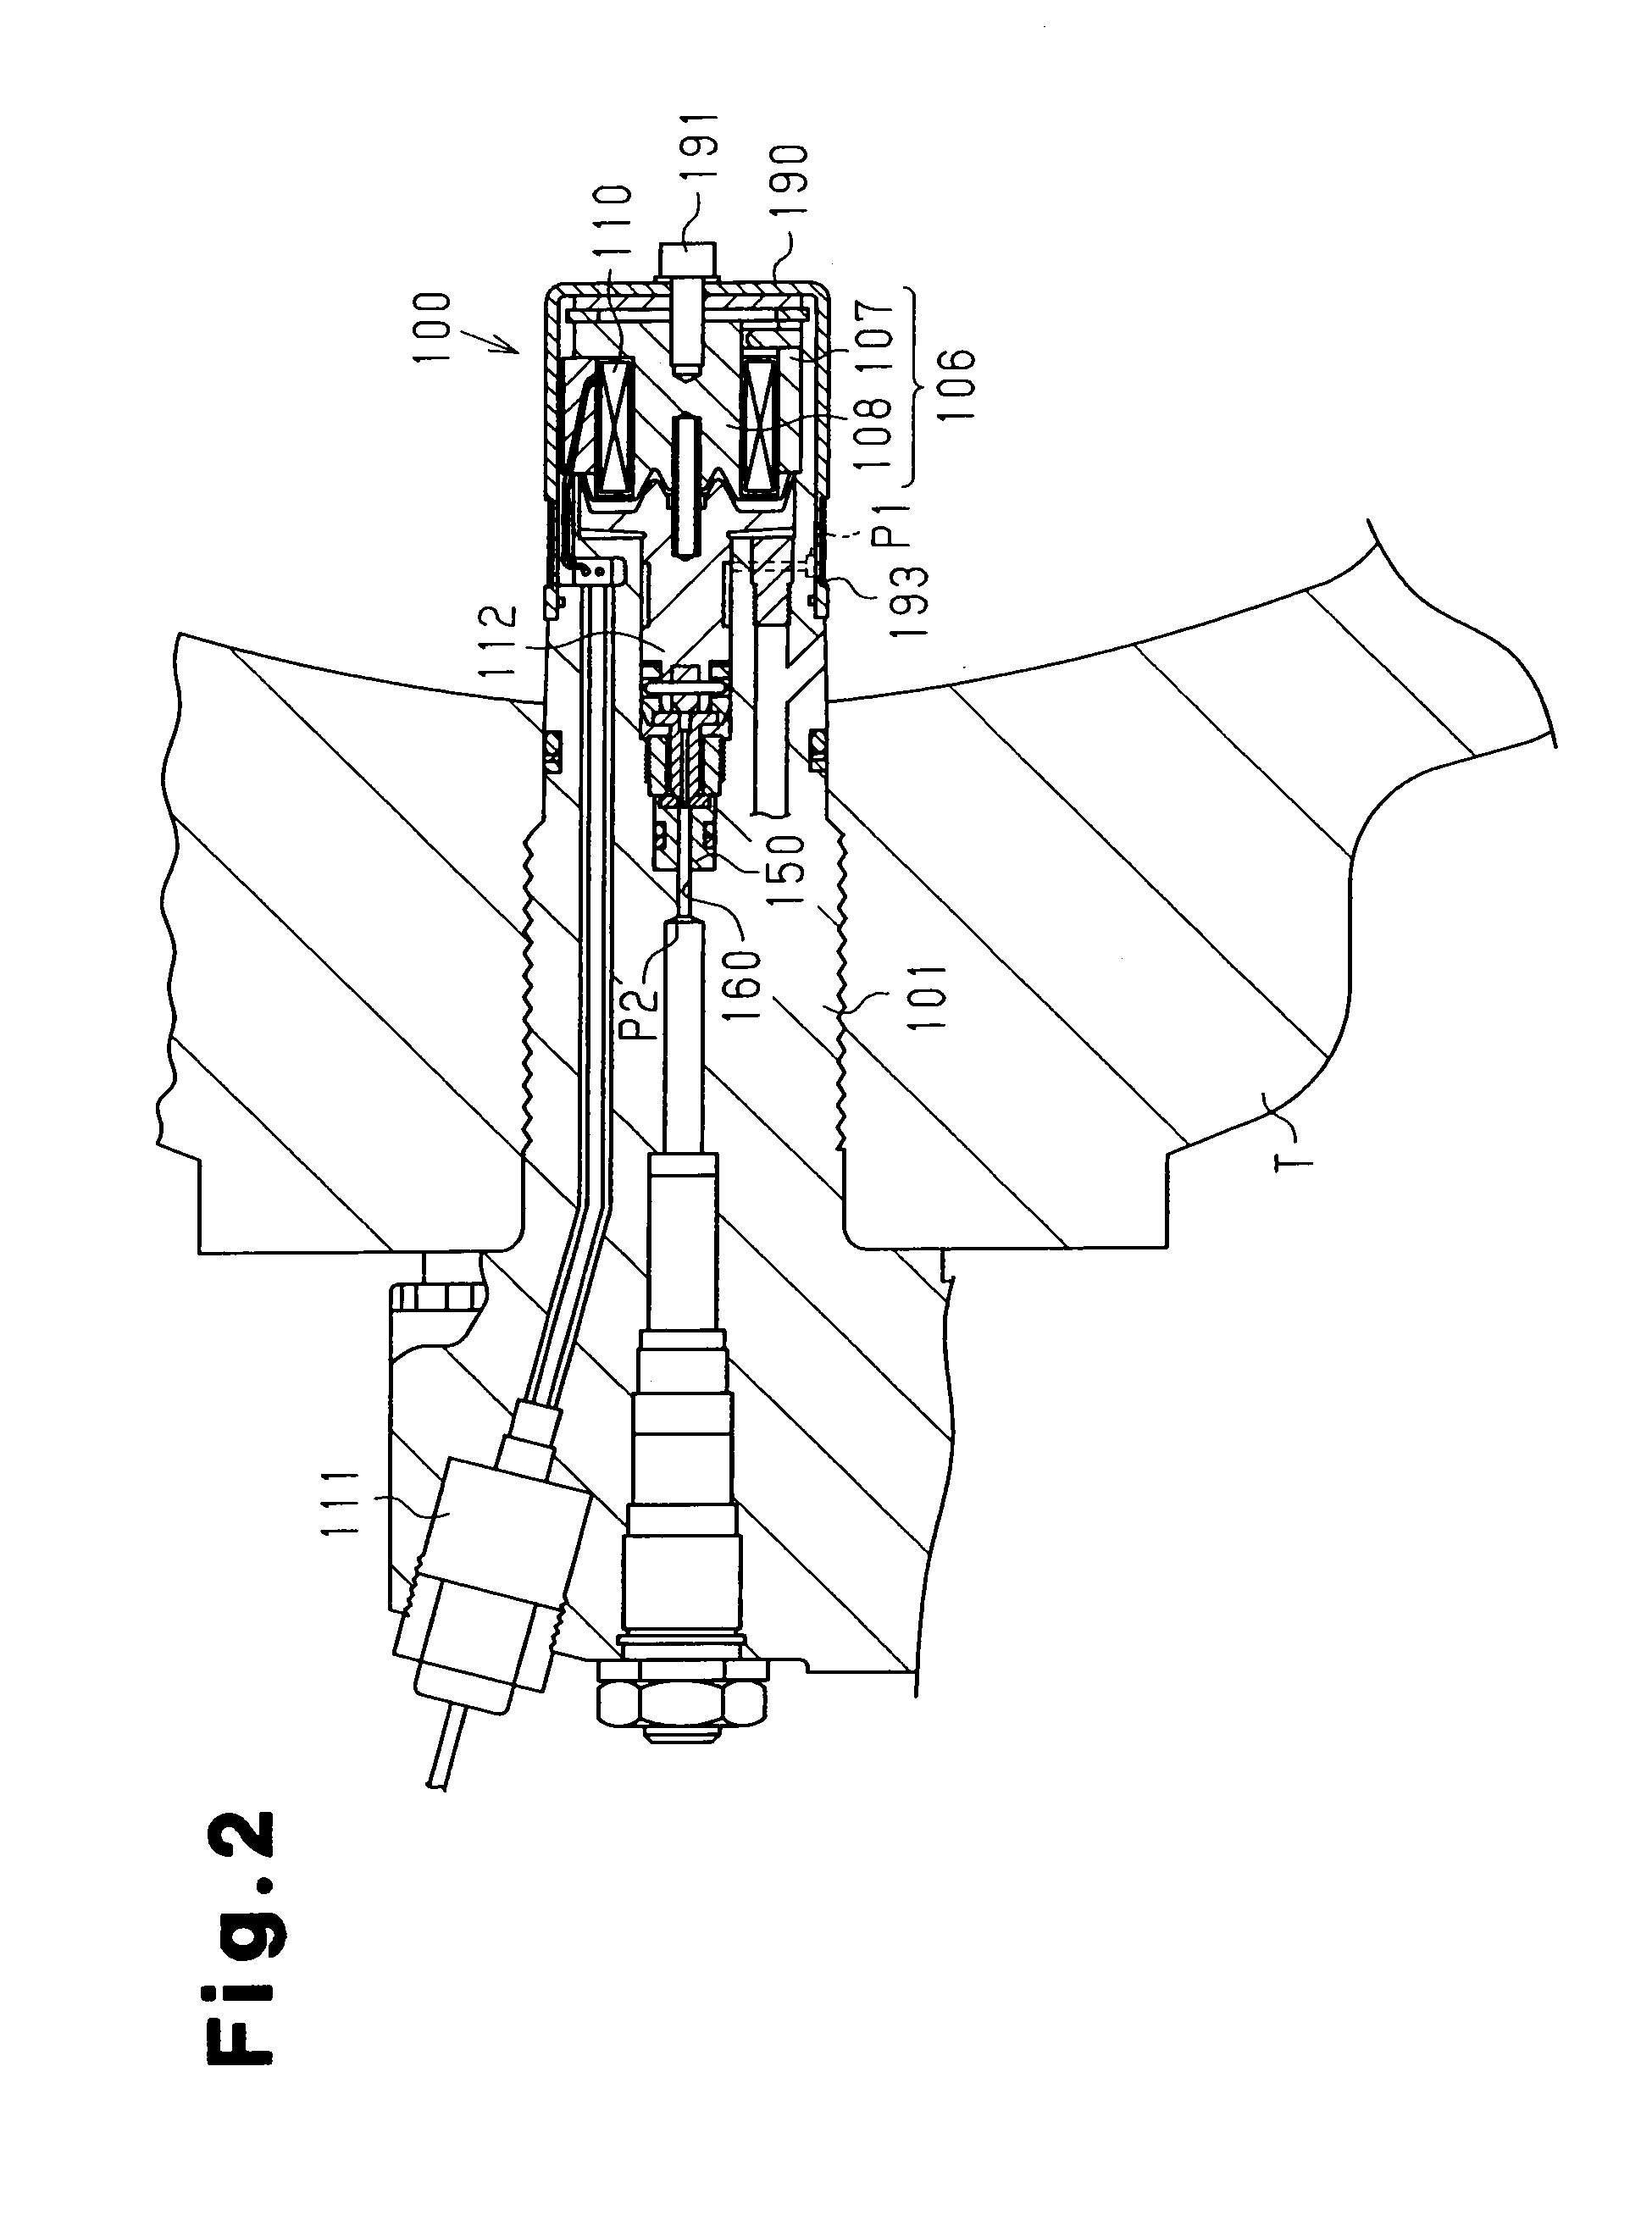 High pressure valve for hydrogen gas and decompression device for hydrogen gas